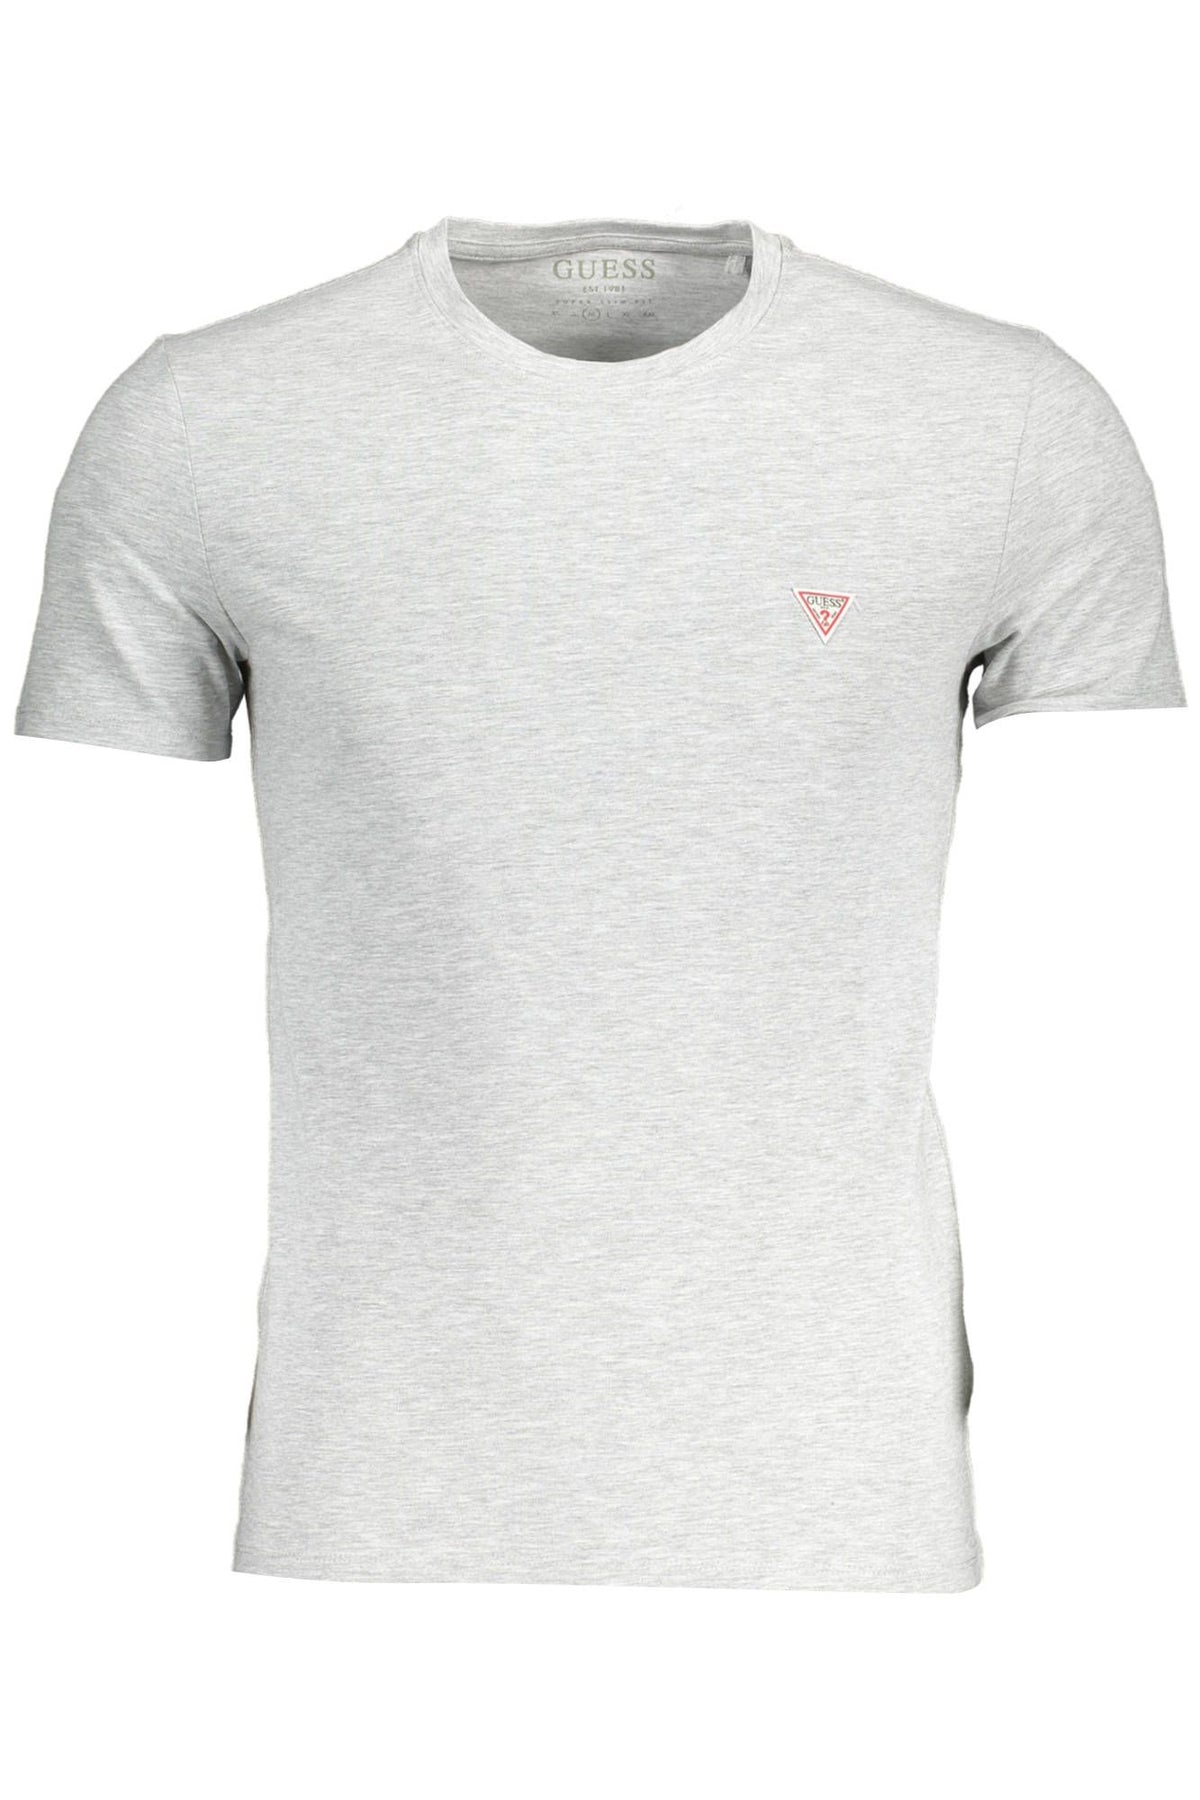 Guess Jeans Essential Gray Crew Neck Logo Tee